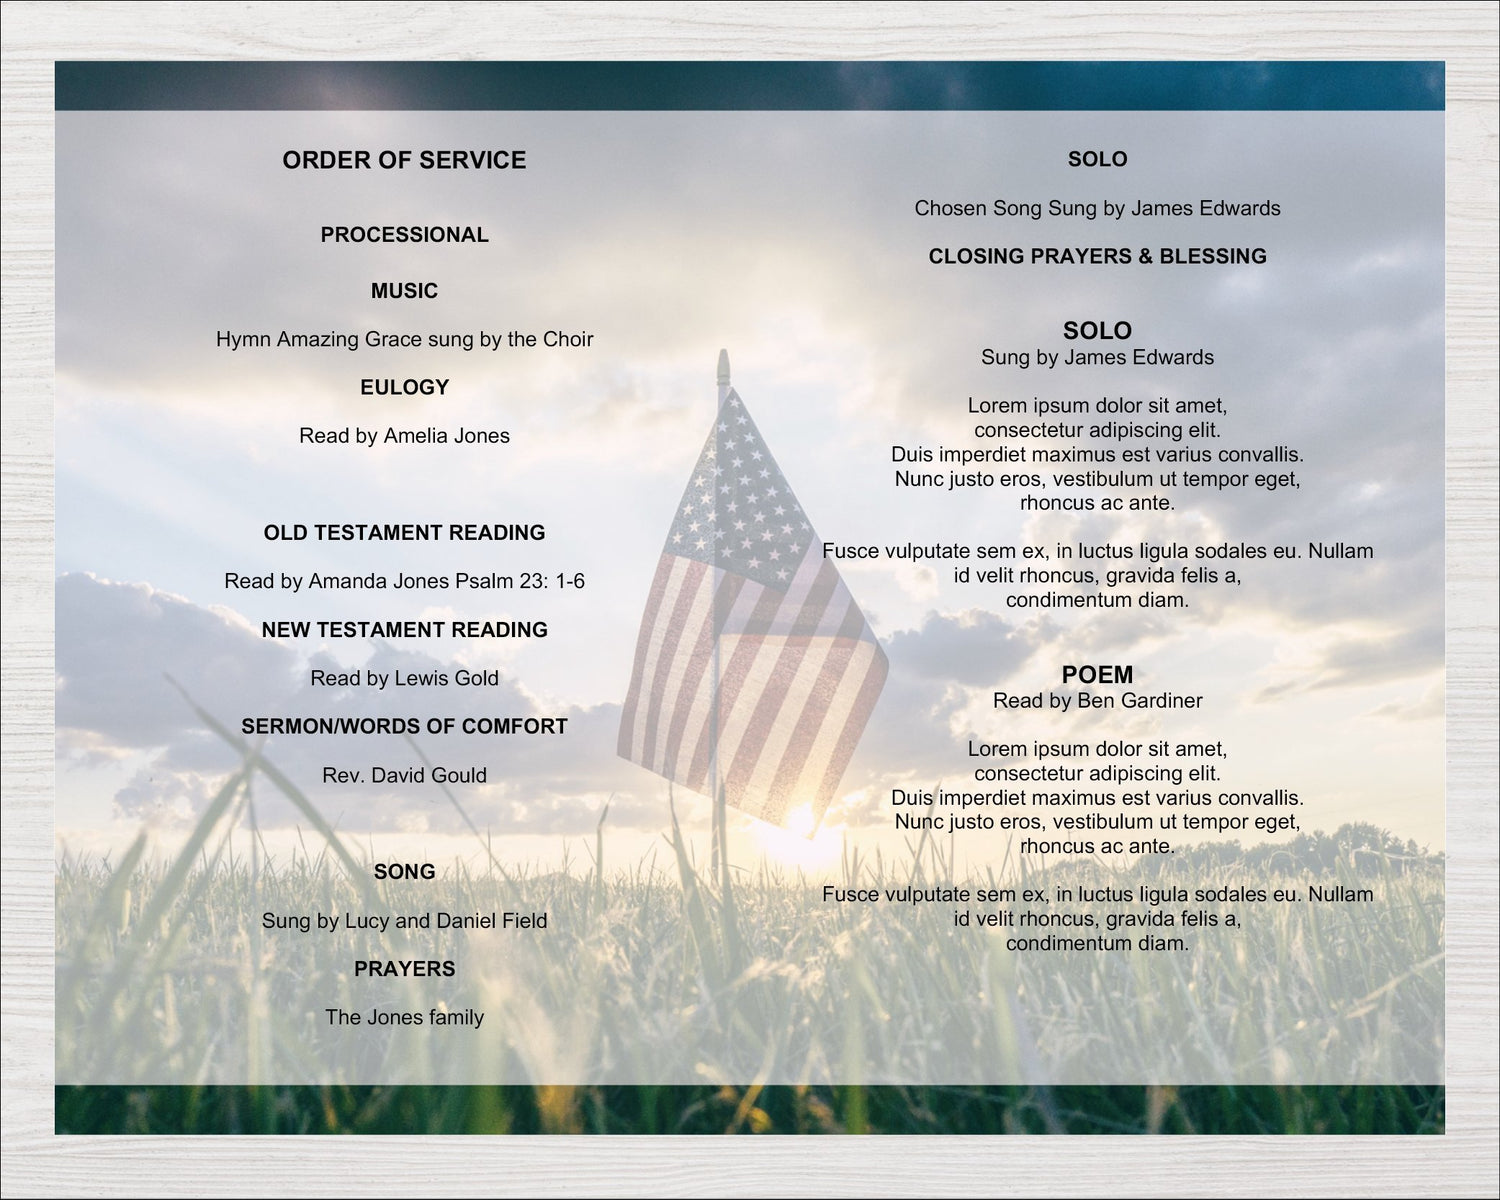 8 Page Military Funeral Program Template